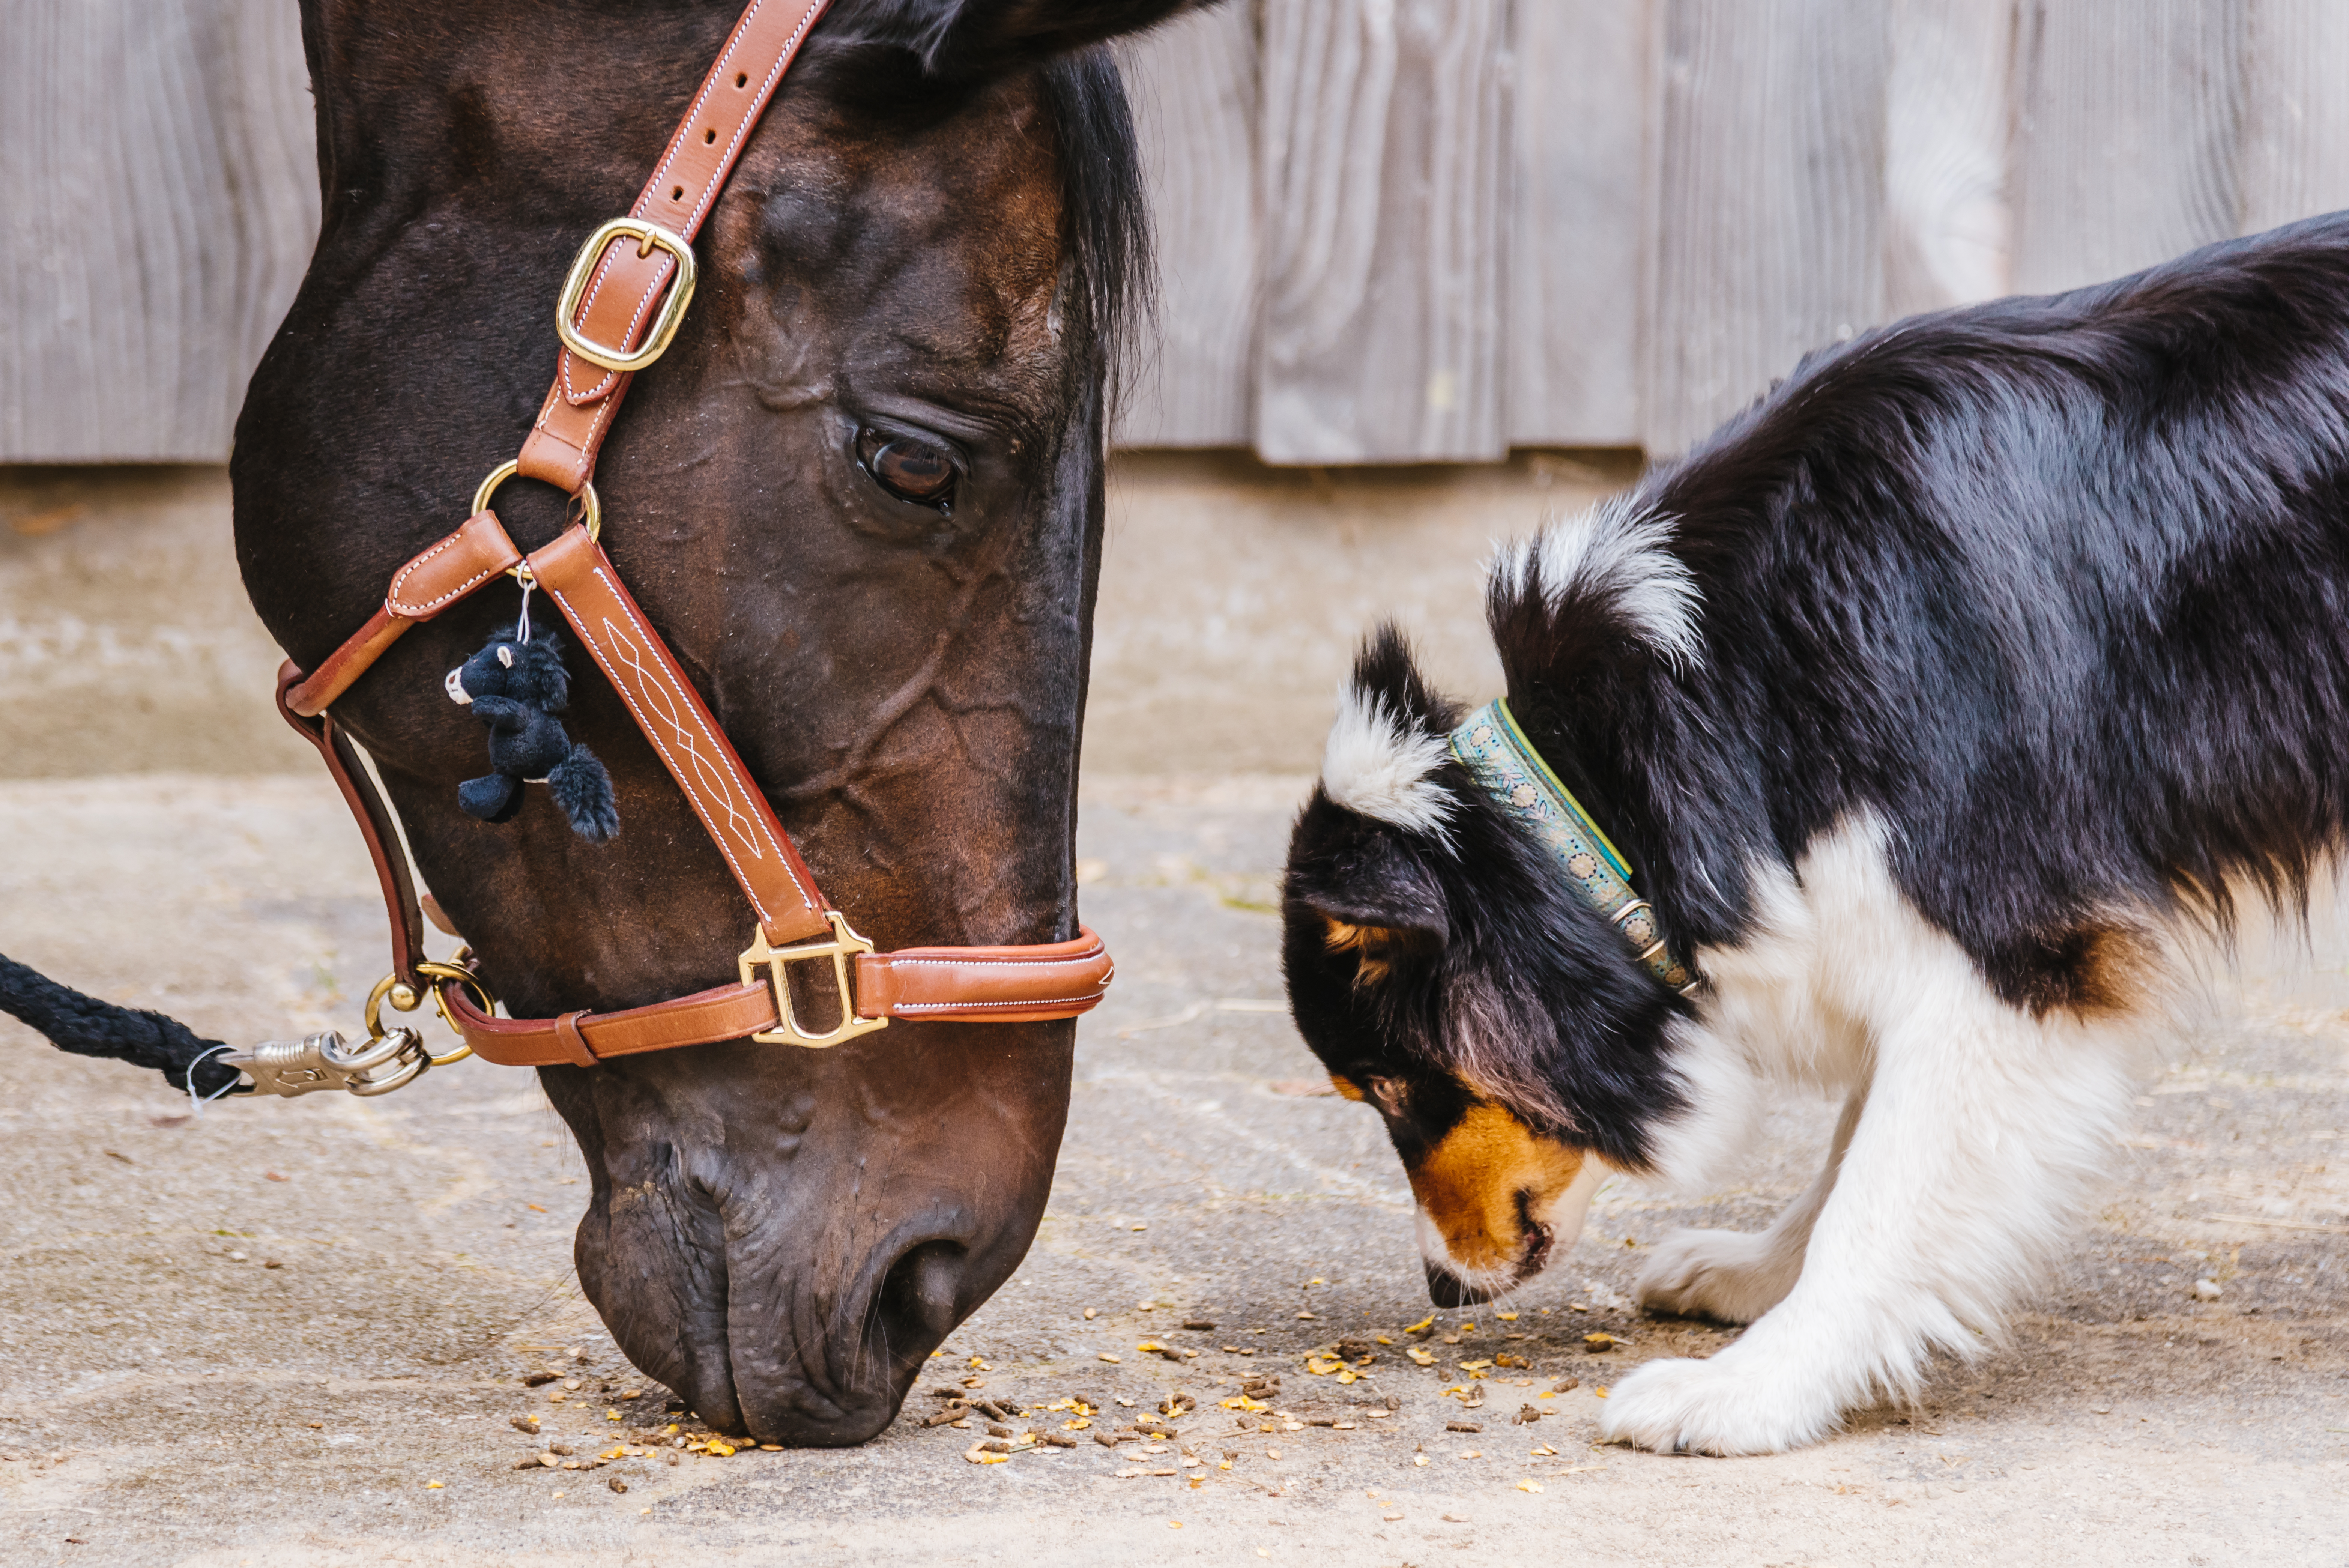 Beautiful dark brown horse and cute little border collie dog next to each other eating together from the ground.